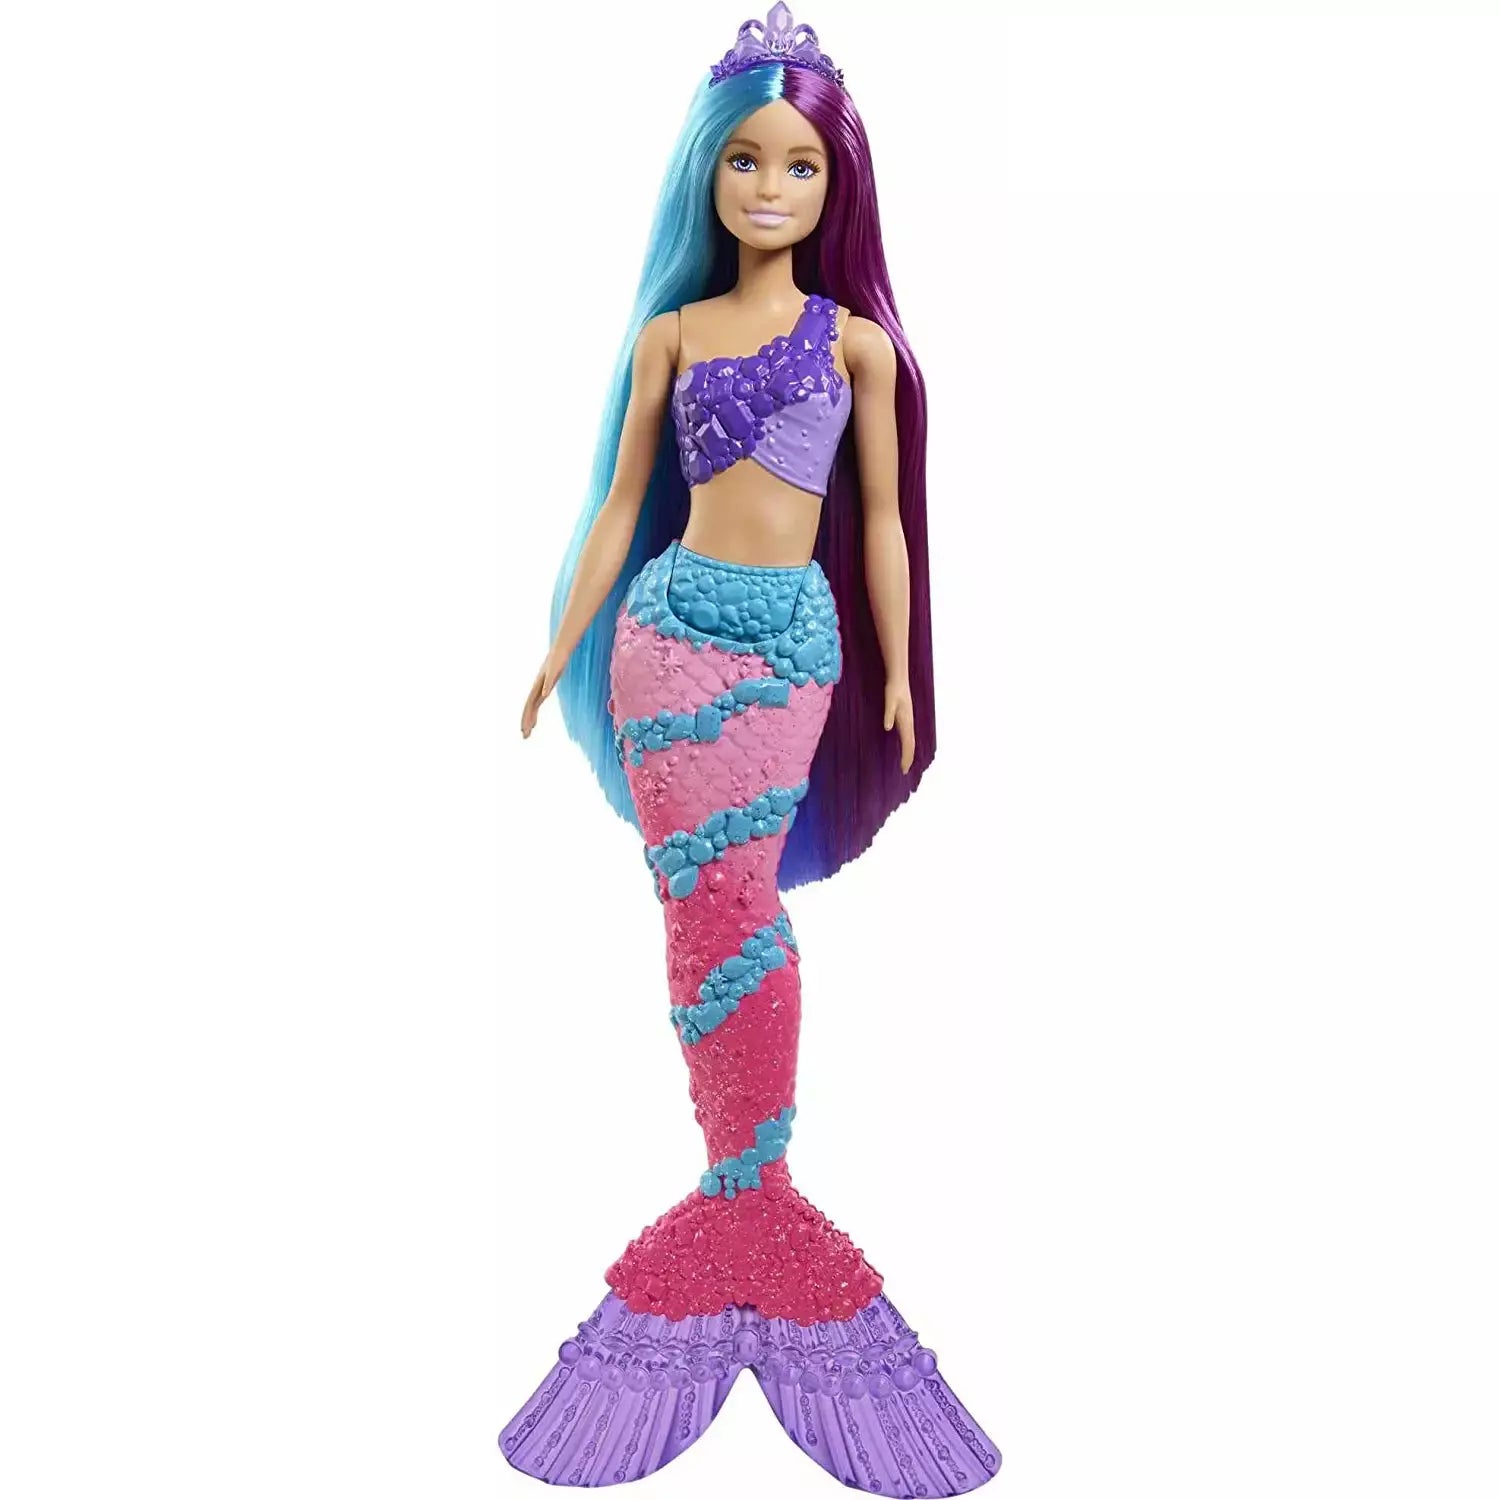 Barbie Dreamtopia Mermaid Doll (13-inch) with Extra-Long Two-Tone Fantasy Hair, Hairbrush, Tiaras and Styling Accessories - BumbleToys - 5-7 Years, Barbie, Fashion Dolls & Accessories, Girls, Mermaid, Pre-Order